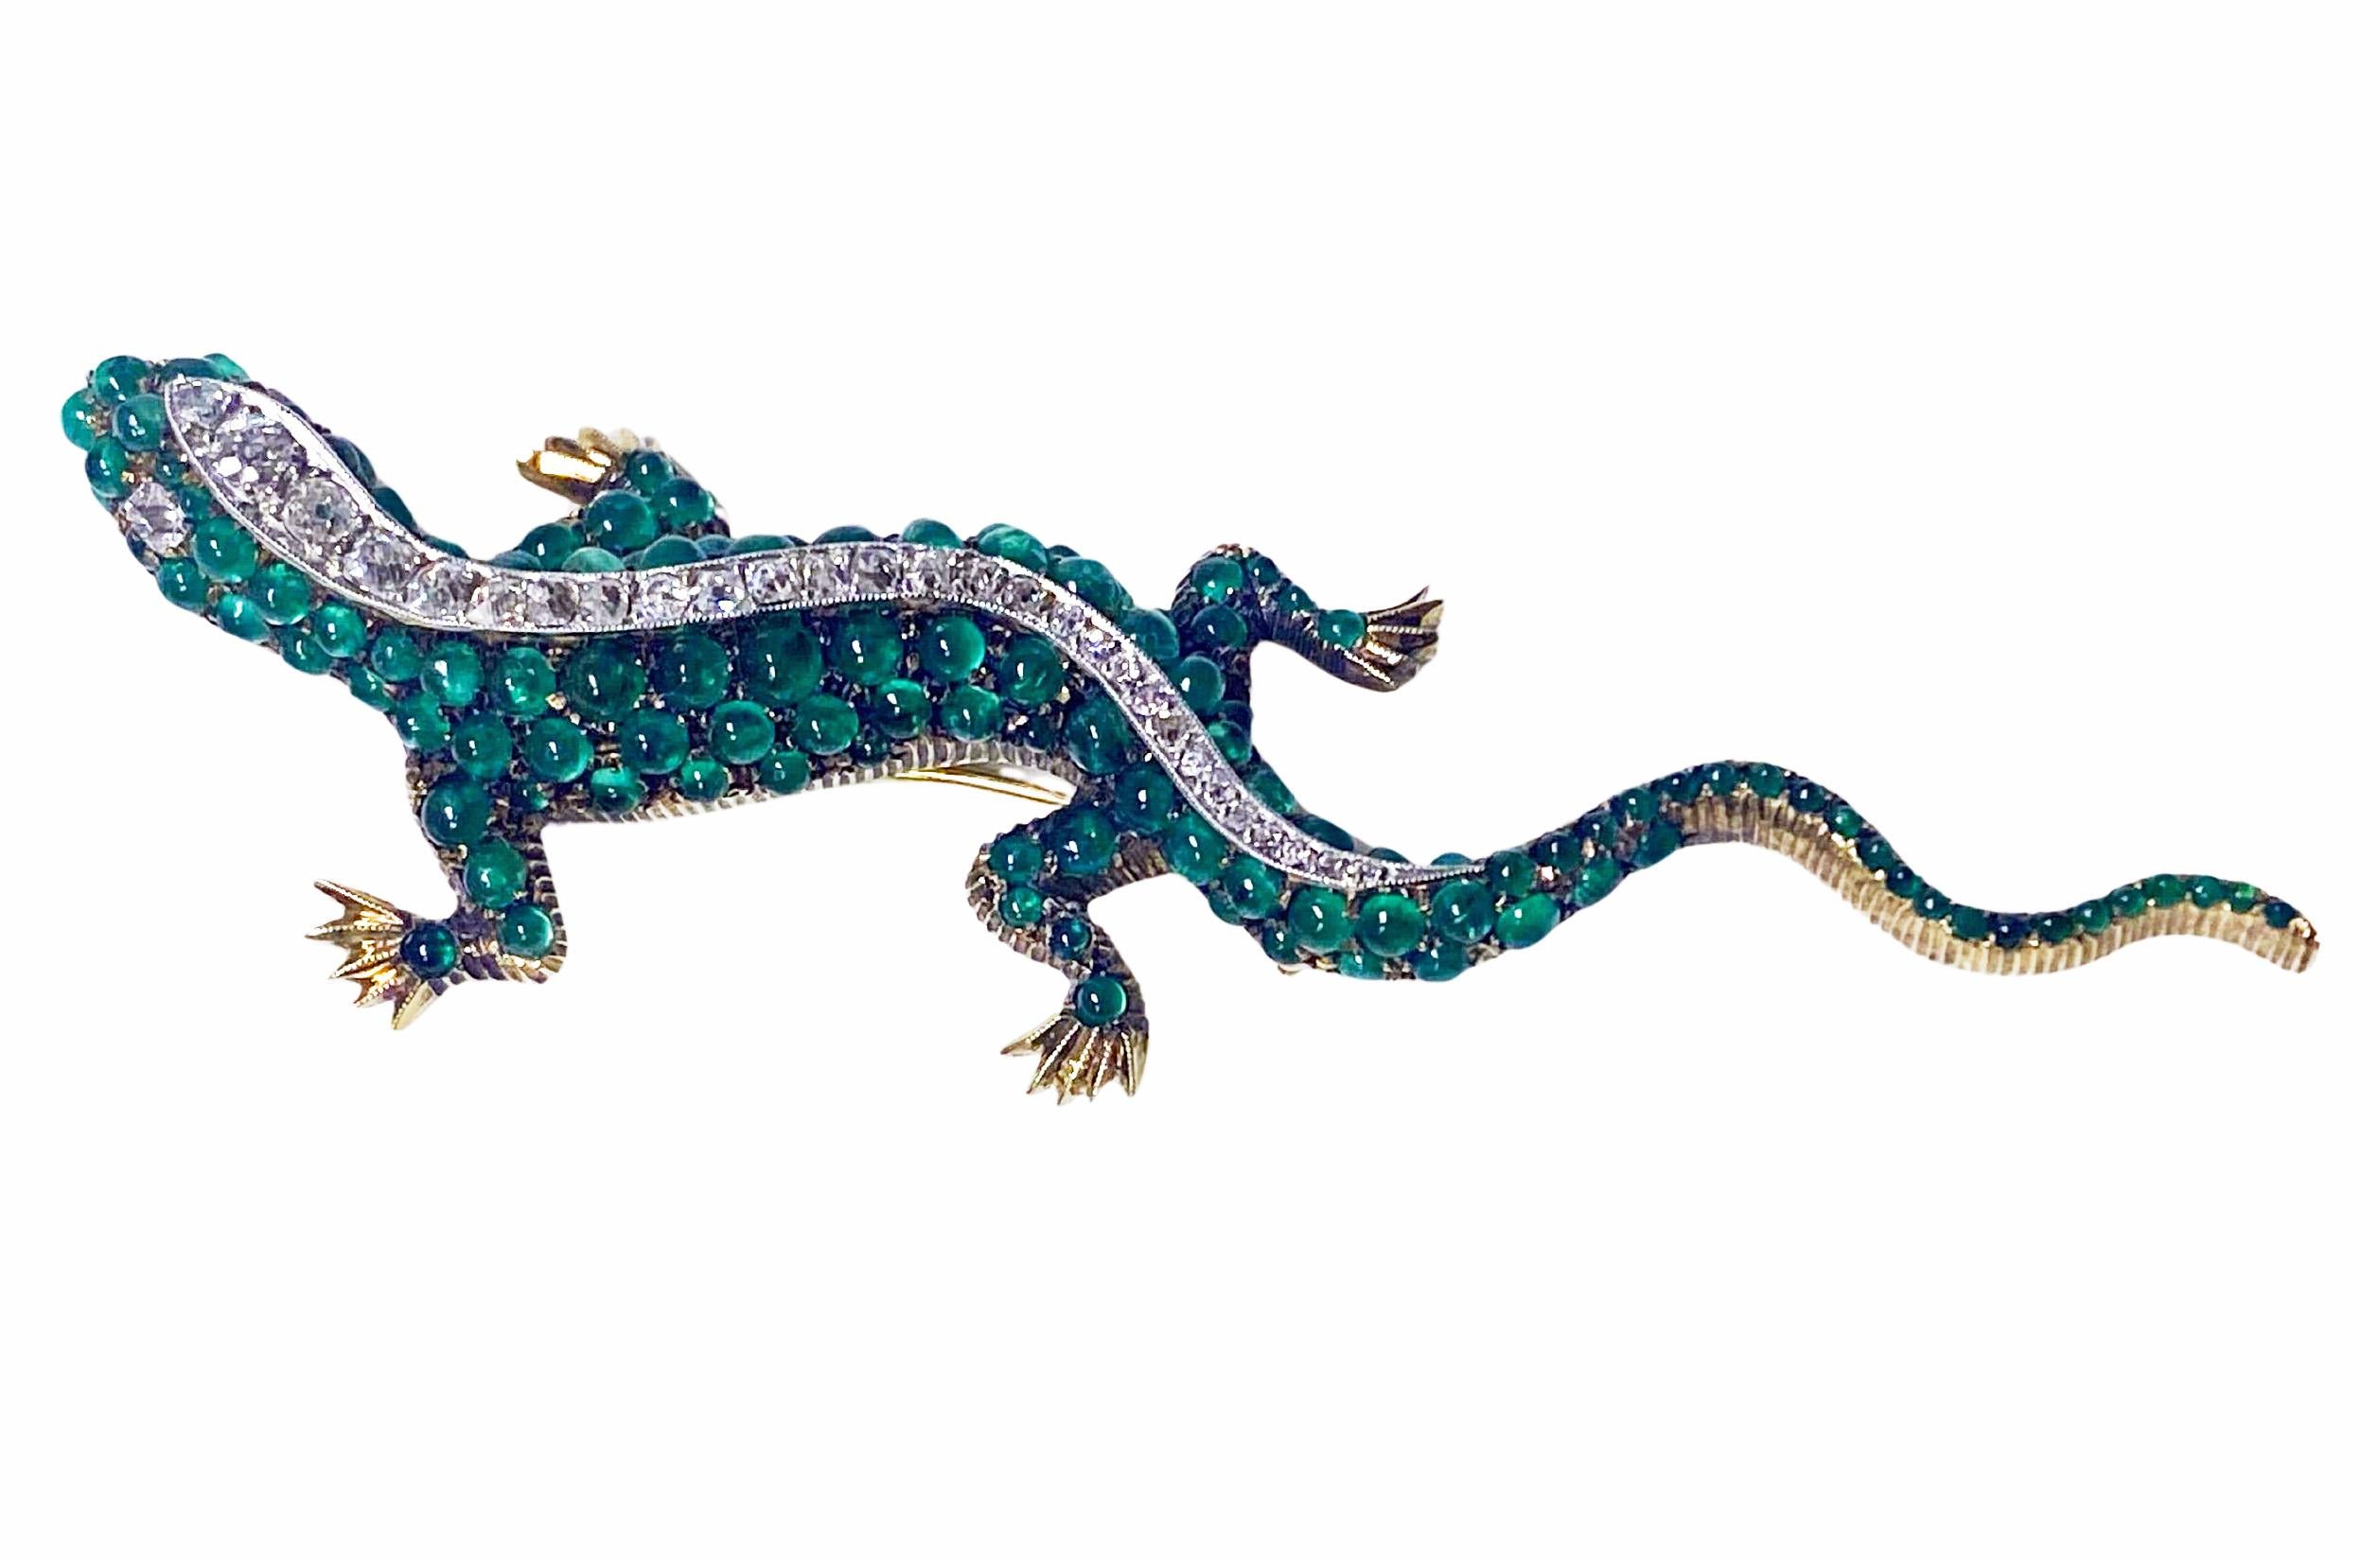 Antique 18K Emerald and Diamond salamander brooch C.1900. Superb condition, this large salamander is set with 30 old mine cut diamonds, approximately 1.30 ct total diamond weight and approximately 160 original cabochon emeralds all mounted in 18K